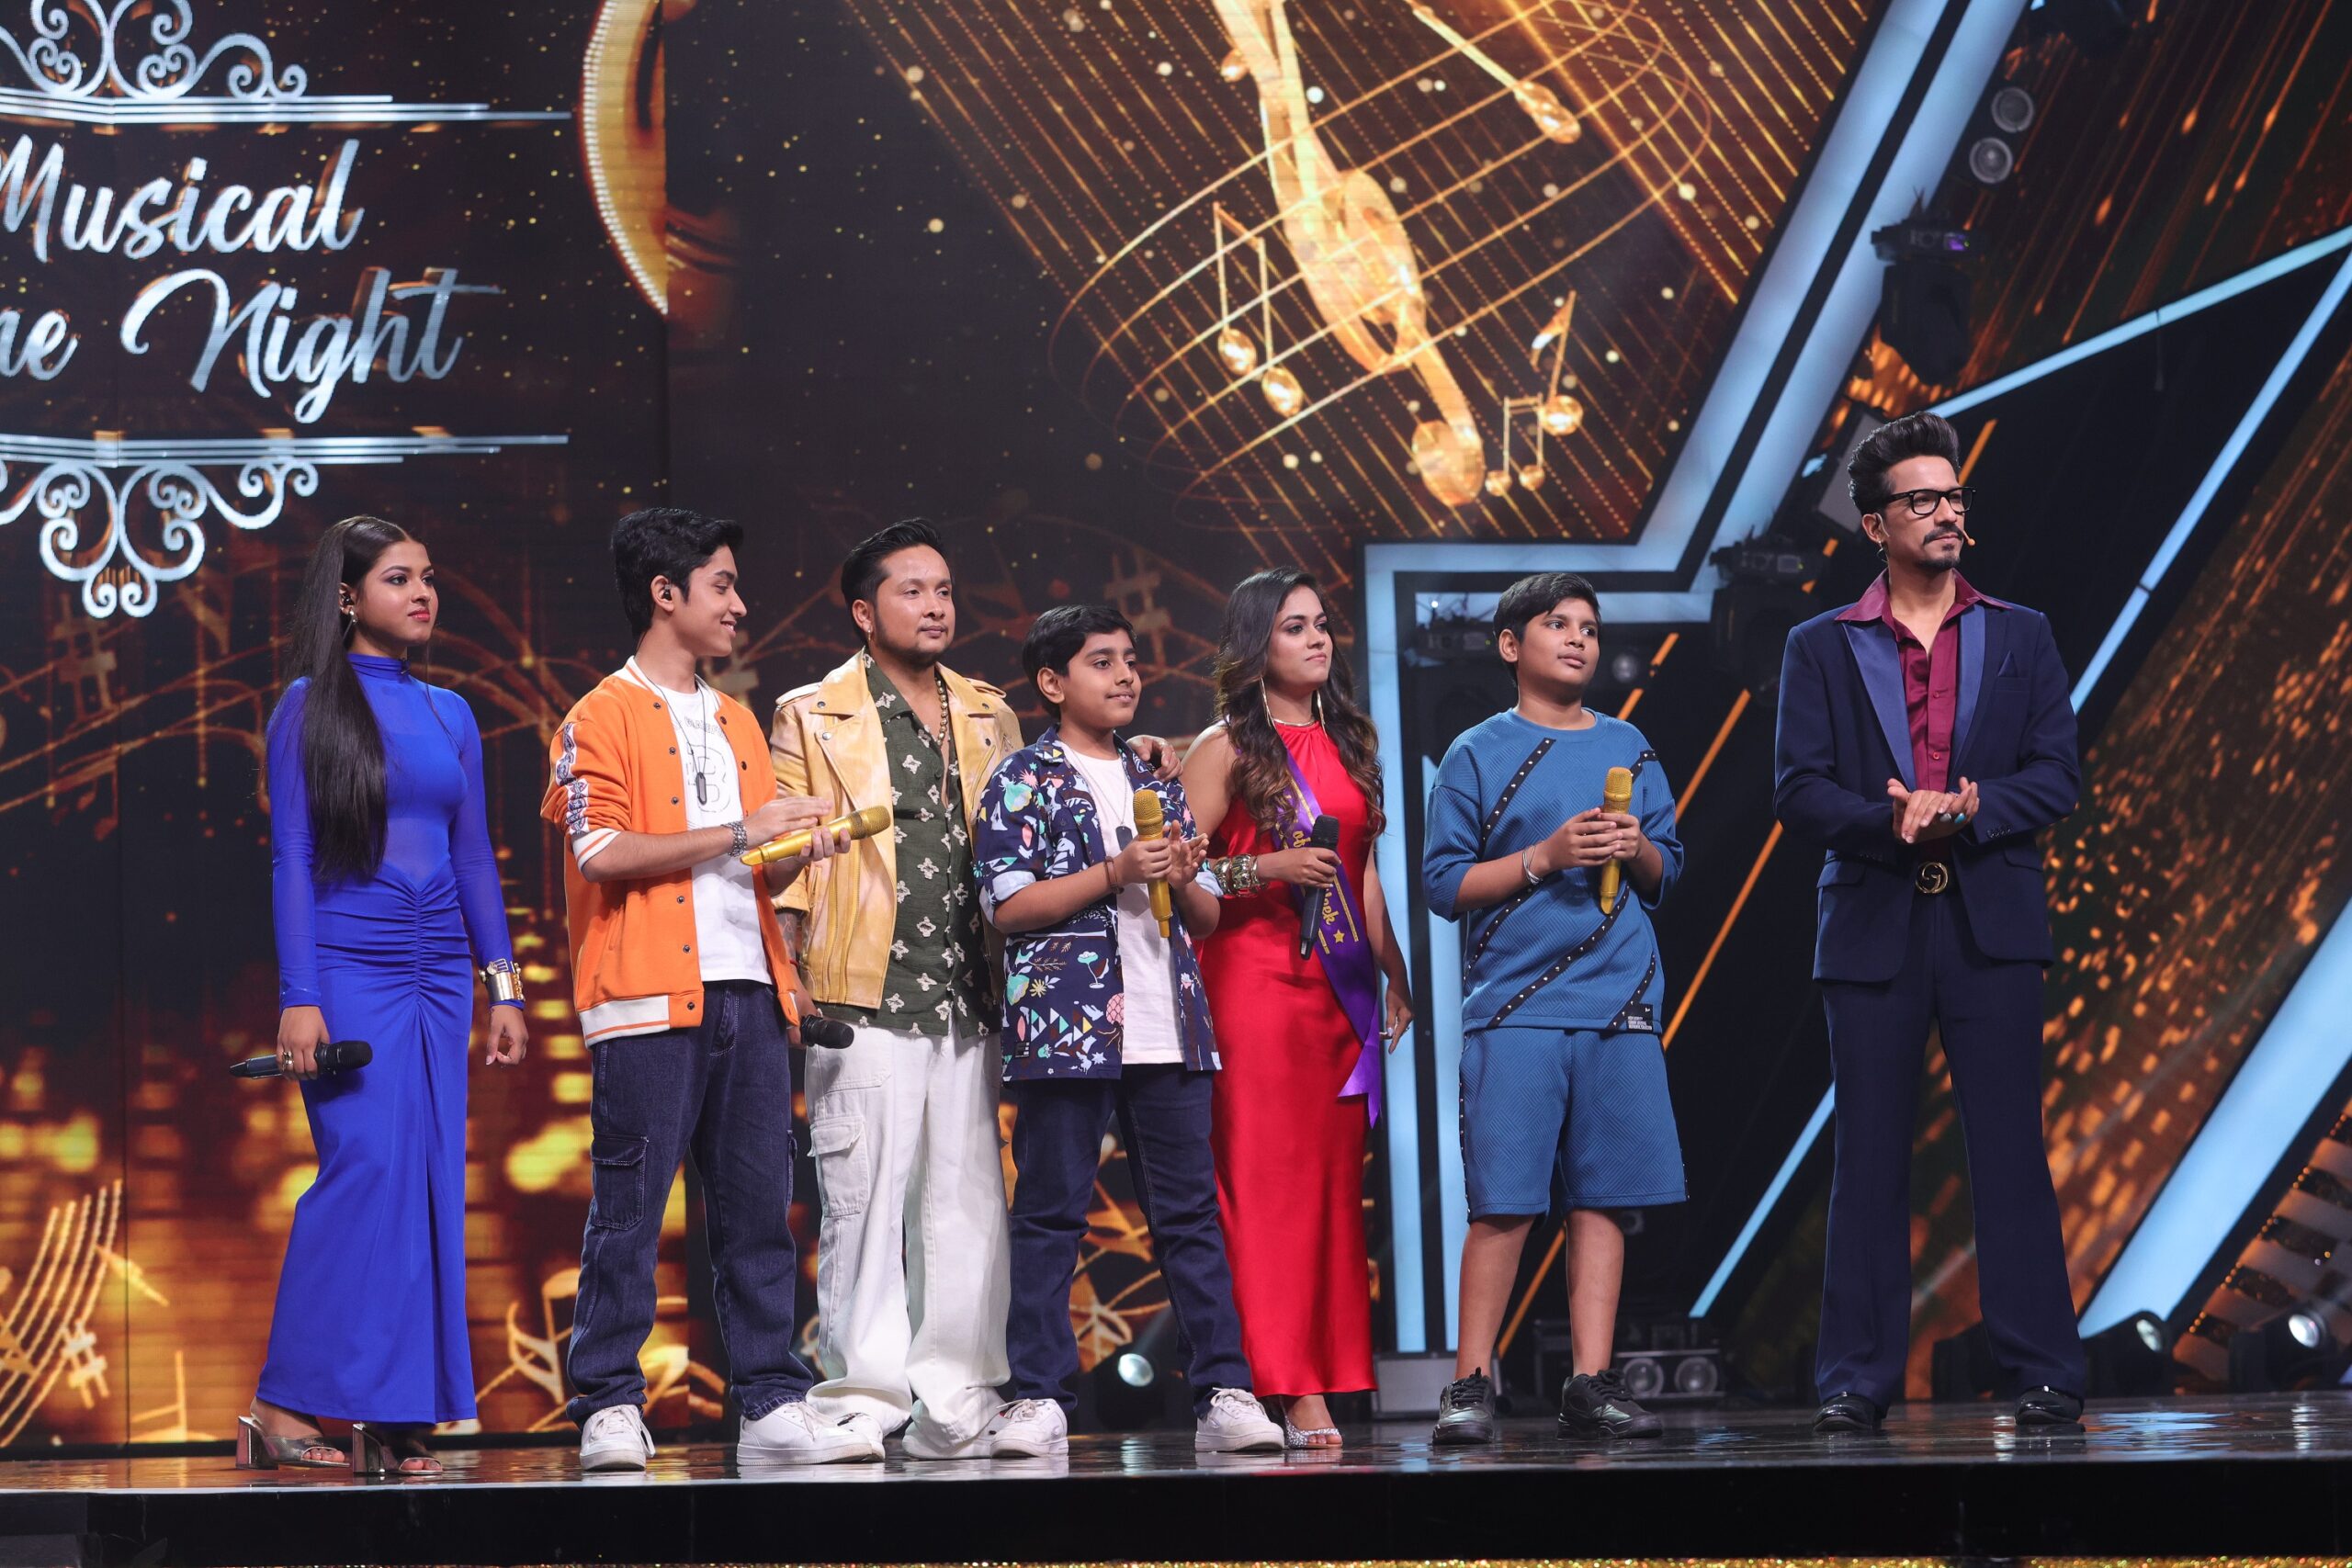 On Superstar Singer 3, the musical trio - Shubh Sutradhar, Atharv Bakshi, and Kshitij Saxena leave everyone awed with their rendition of ‘Dil Se Re’